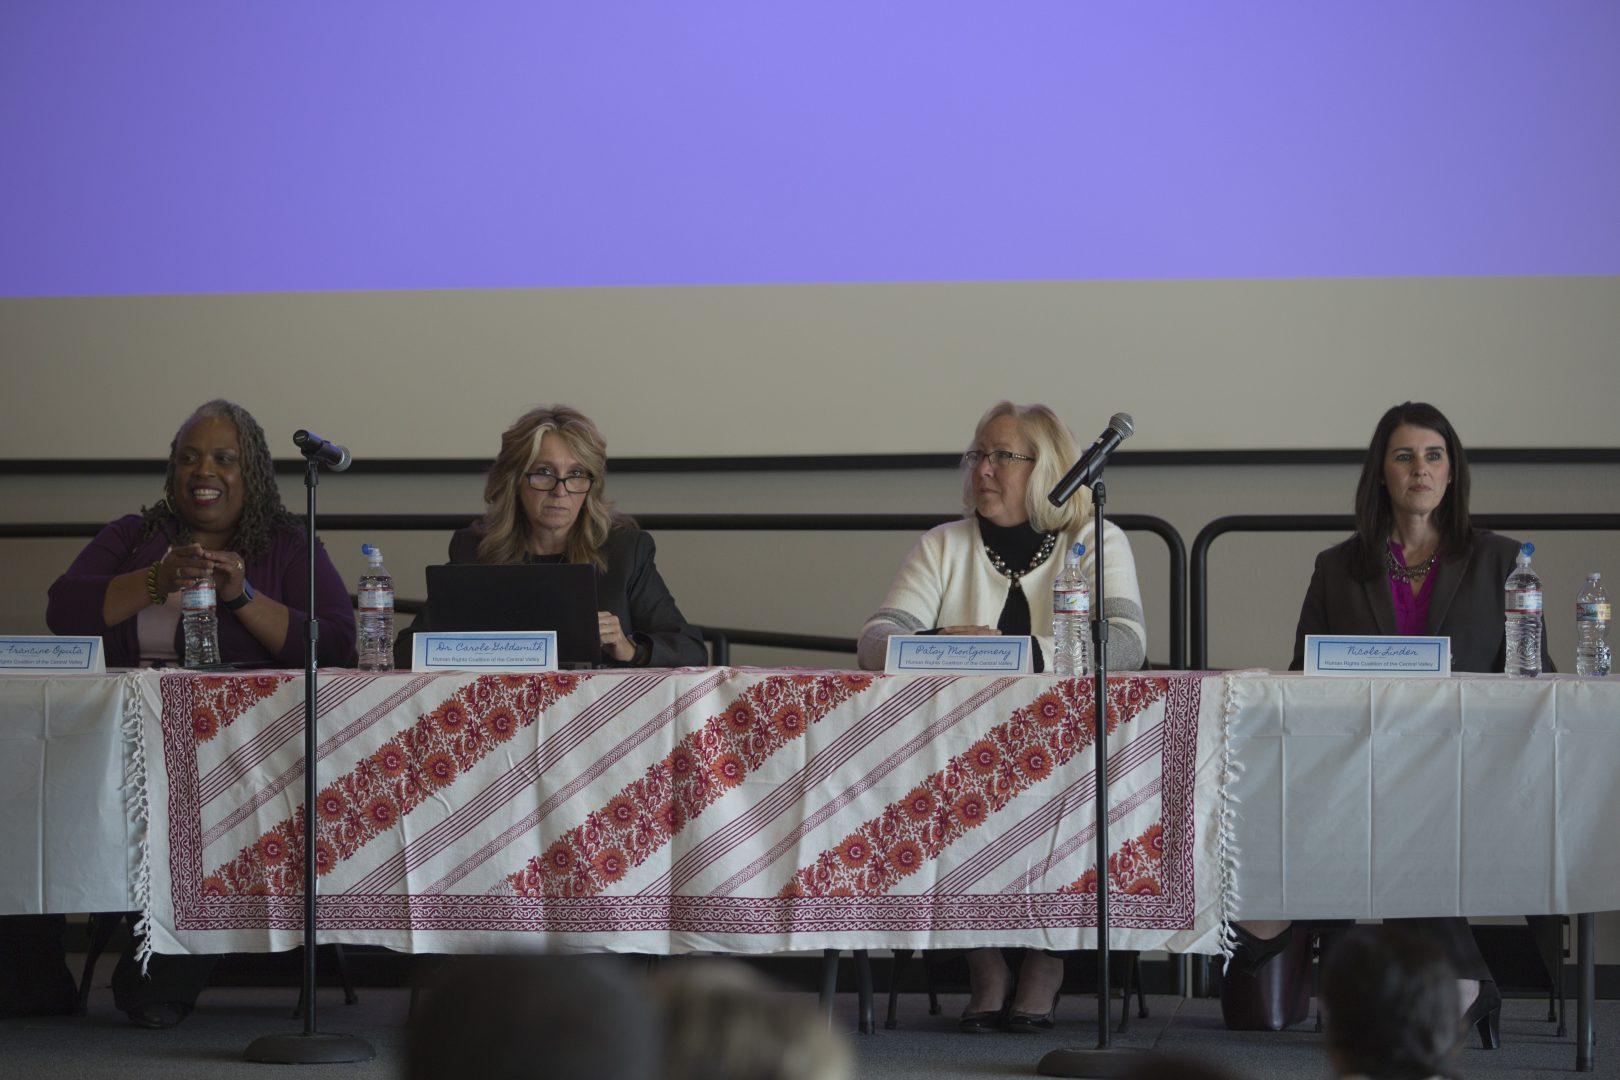 Panelists from the “Women’s Rights are Human Rights” event on Dec. 9, 2017 in Fresno State’s North Gym Room 118. (Daniel Avalos/The Collegian)